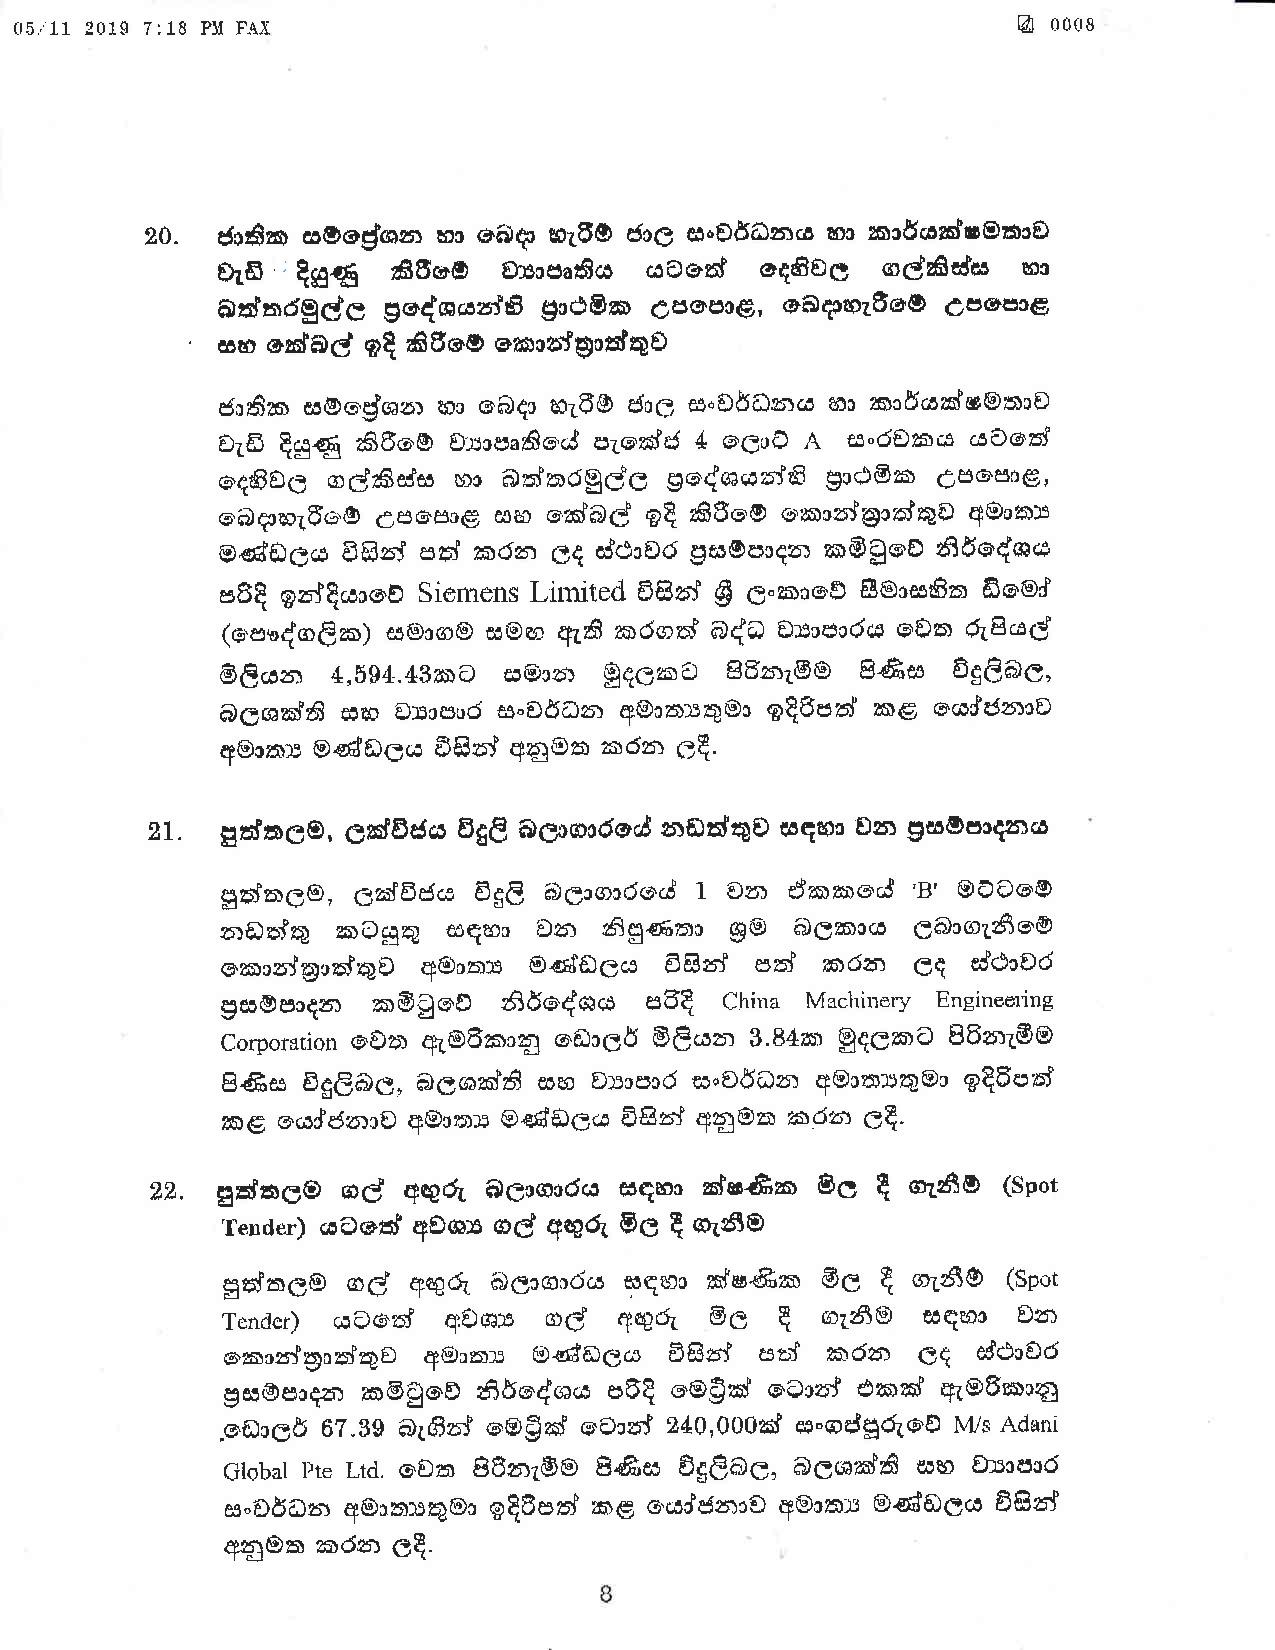 Cabinet Decision on 05.11.2019 page 008